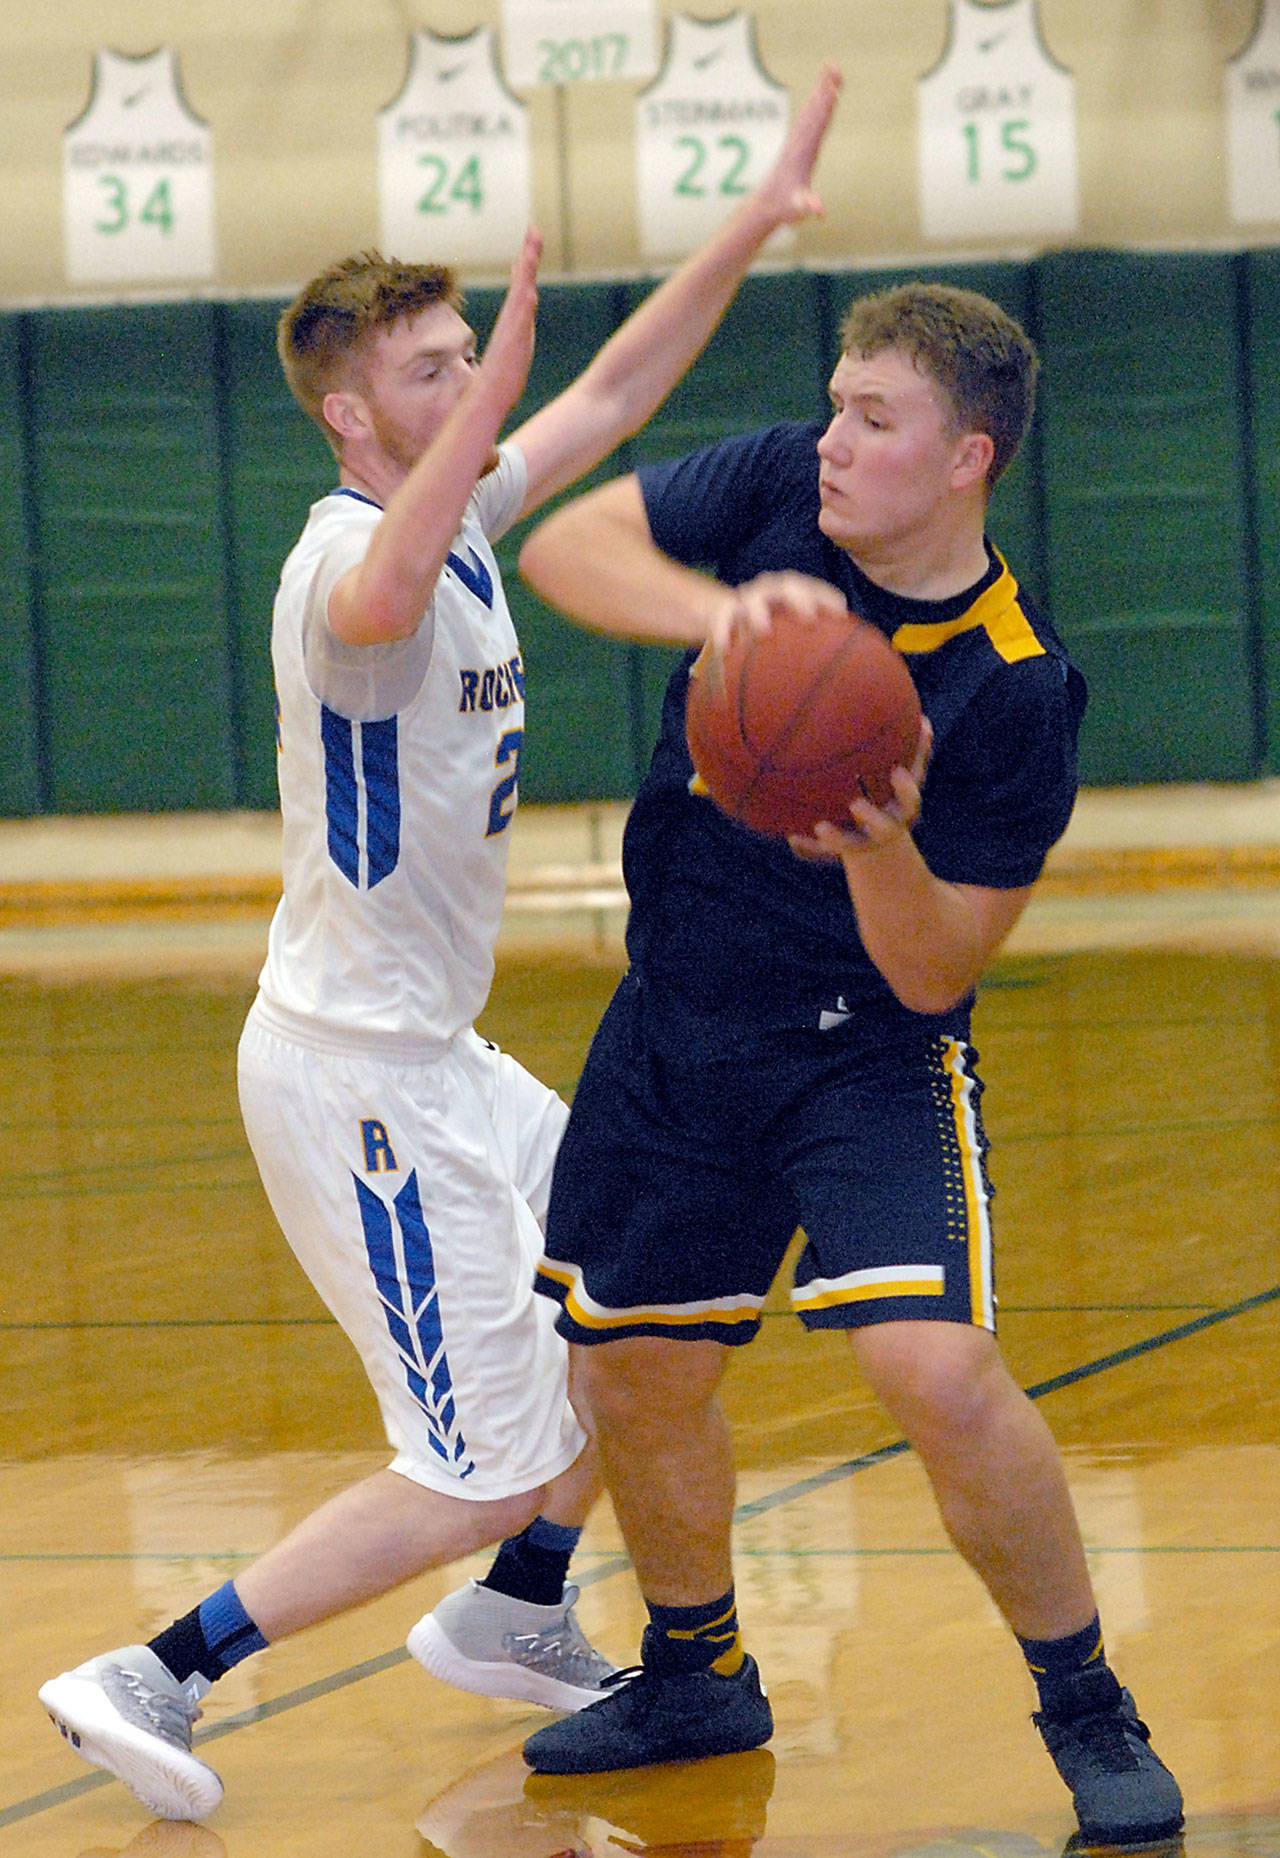 Keith Thorpe/Peninsula Daily News Forks’ Cort Prose looks to pass around the defense of Rochester’s Keegan Goldrick during Saturday night’s consolation round of the Port Angeles Holiday Basketball Tournament at Port Angeles High School.